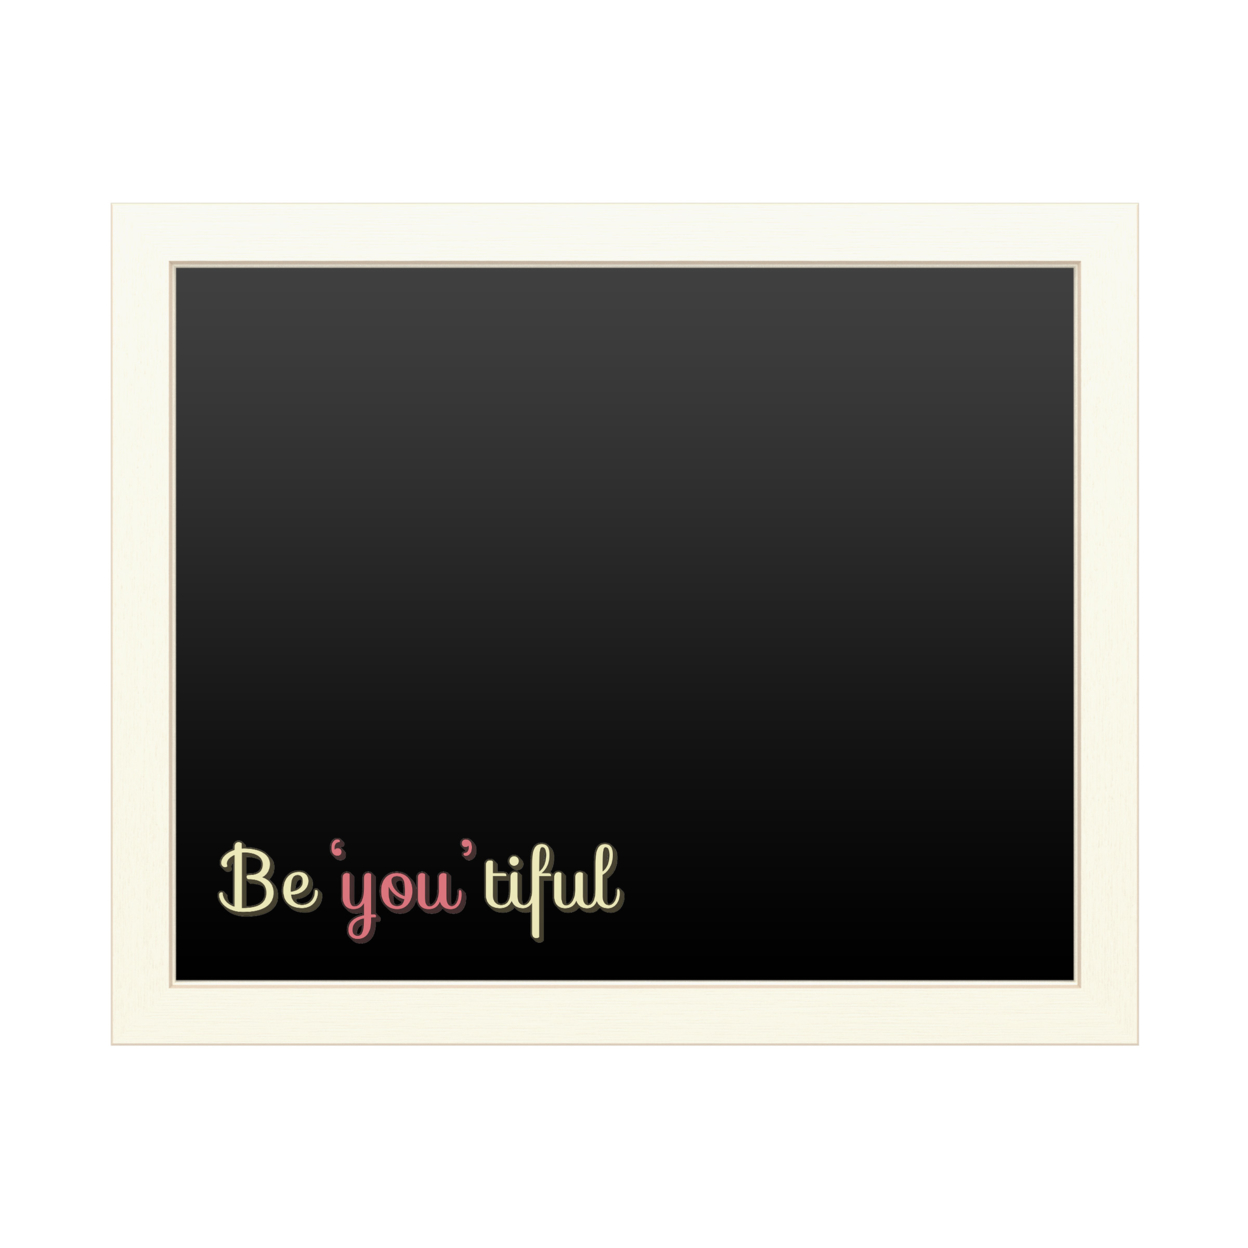 16 X 20 Chalk Board With Printed Artwork - Be You Tiful 2 White Board - Ready To Hang Chalkboard